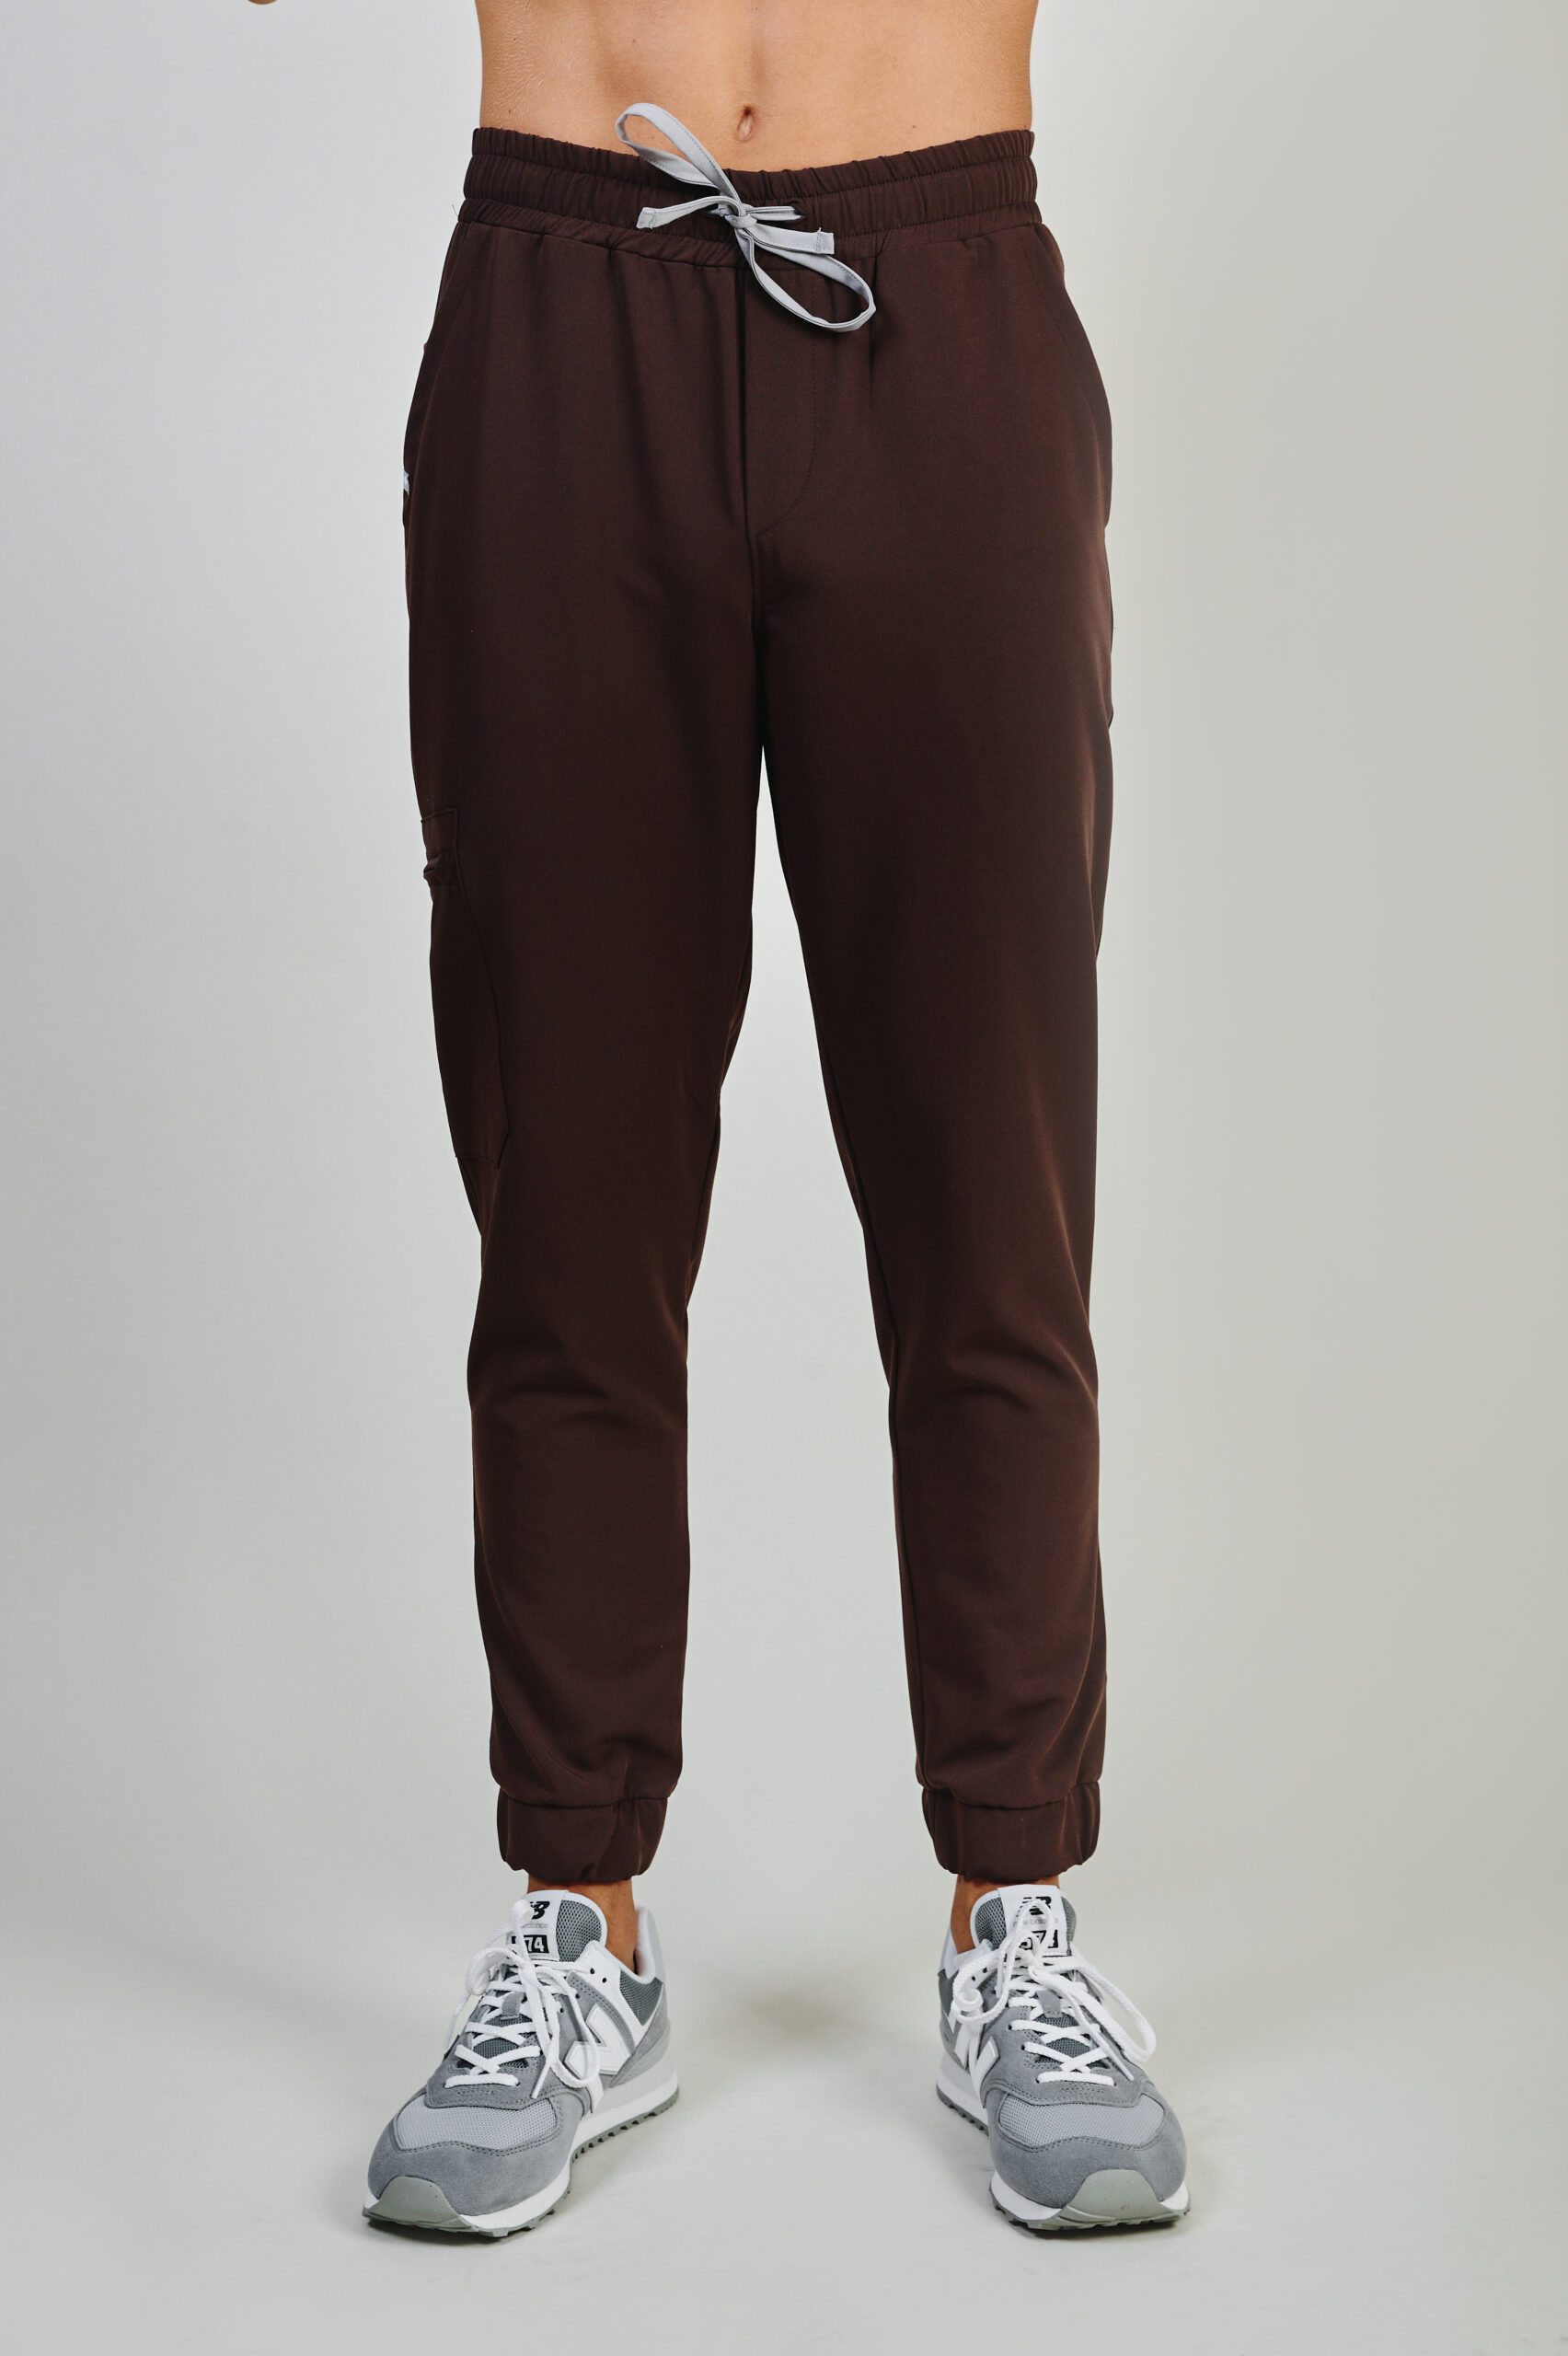 MEDICAL TROUSERS, MEDICAL USE TROUSERS, DOCTORS PANTS